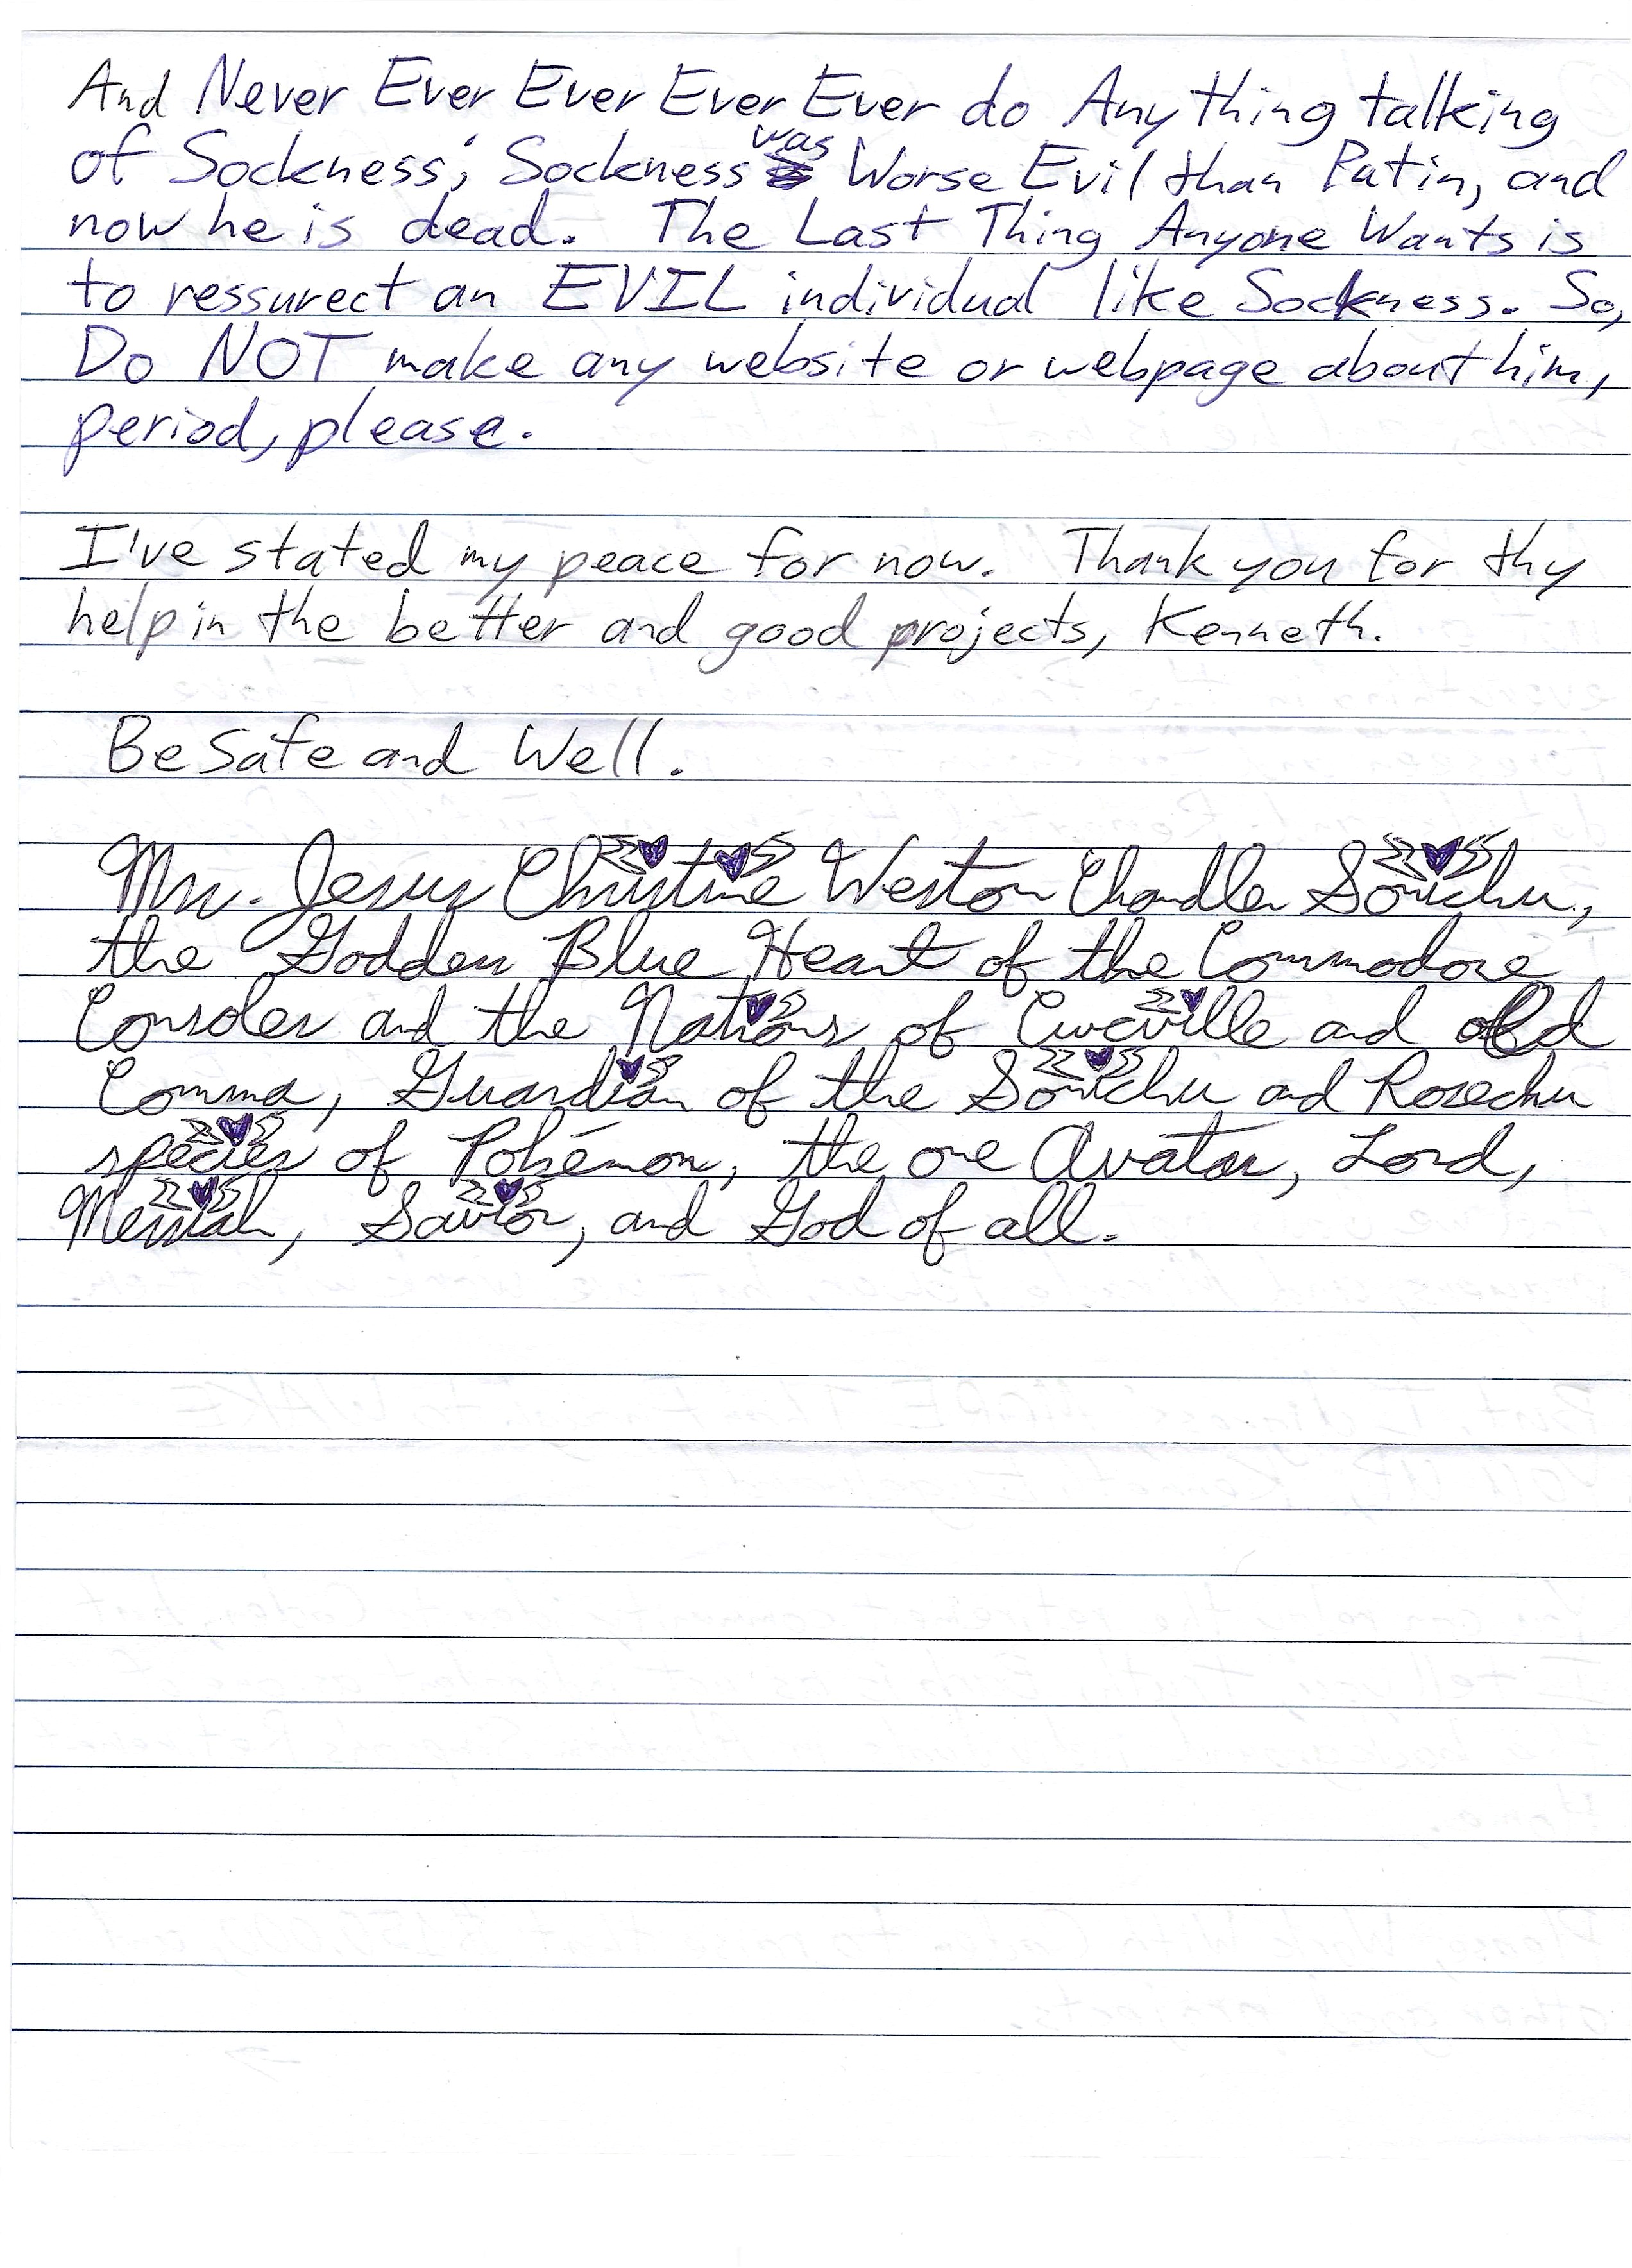 Letter Page 4.jpg